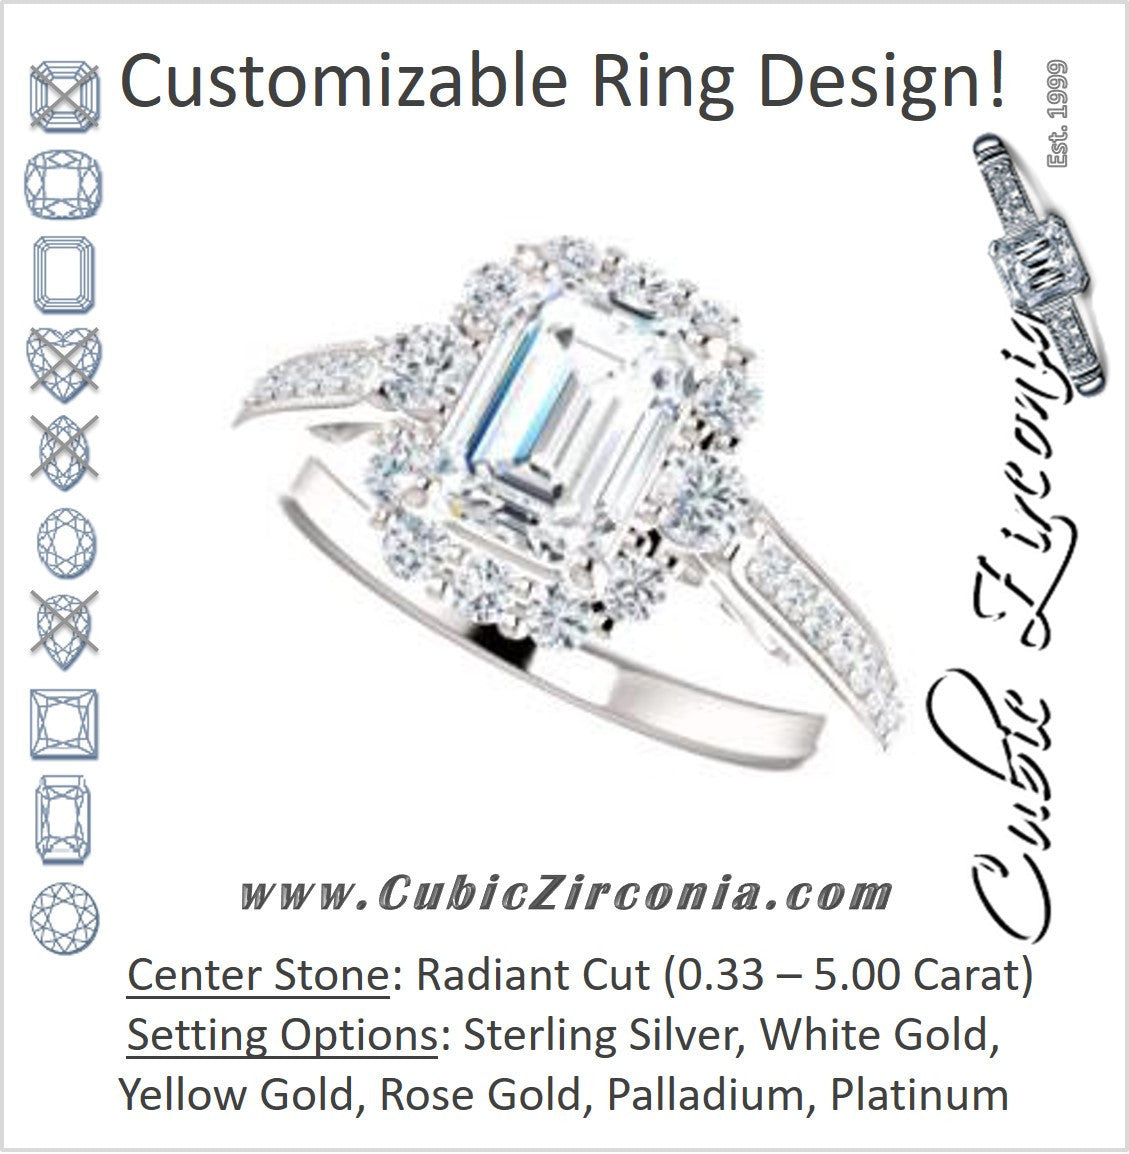 Cubic Zirconia Engagement Ring- The Oceane (Customizable Radiant Cut Design with Raised Decorative-Peekaboo Trellis, Halo and Thin Pavé Band)